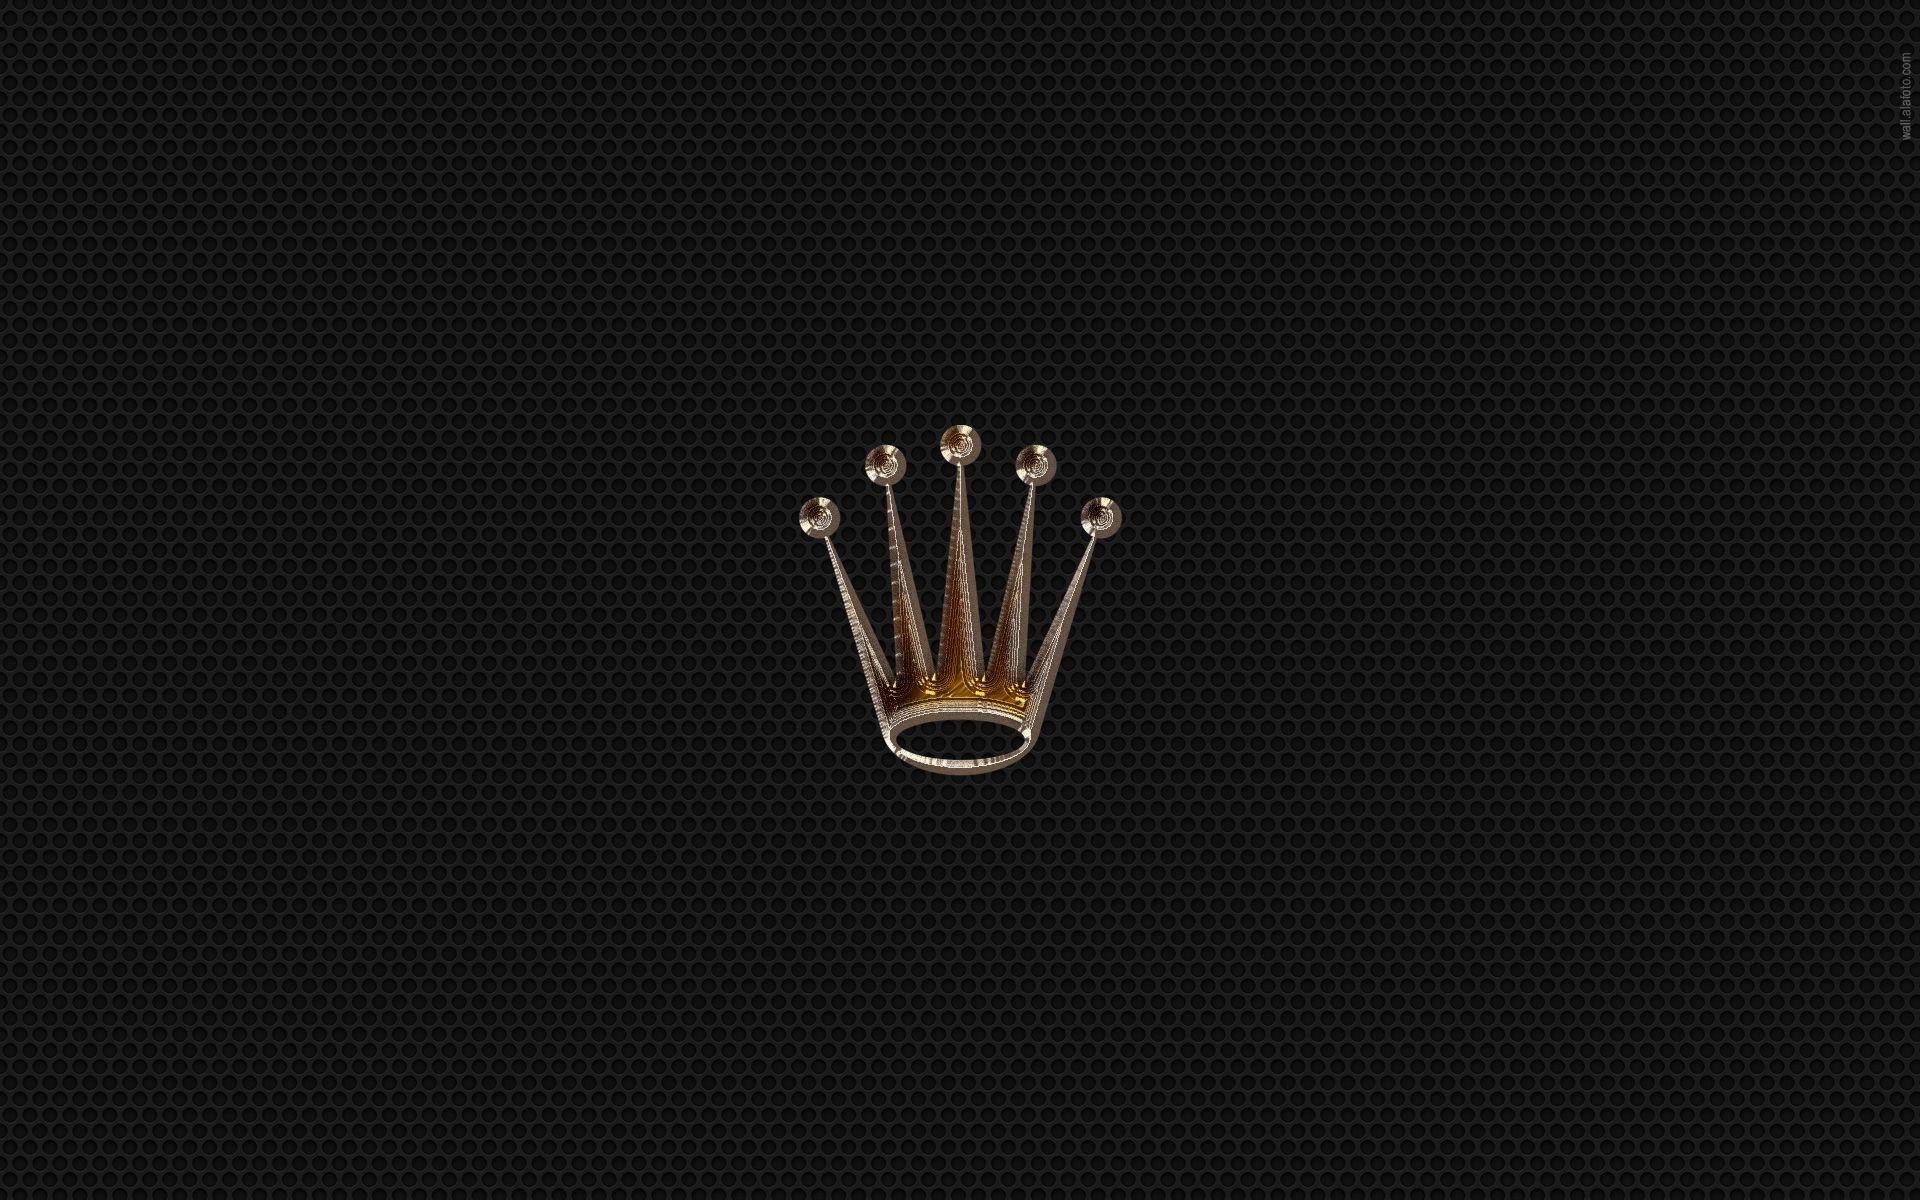 1920x1200 Rolex Wallpapers, Gallery of 32 Rolex Backgrounds, Wallpapers .